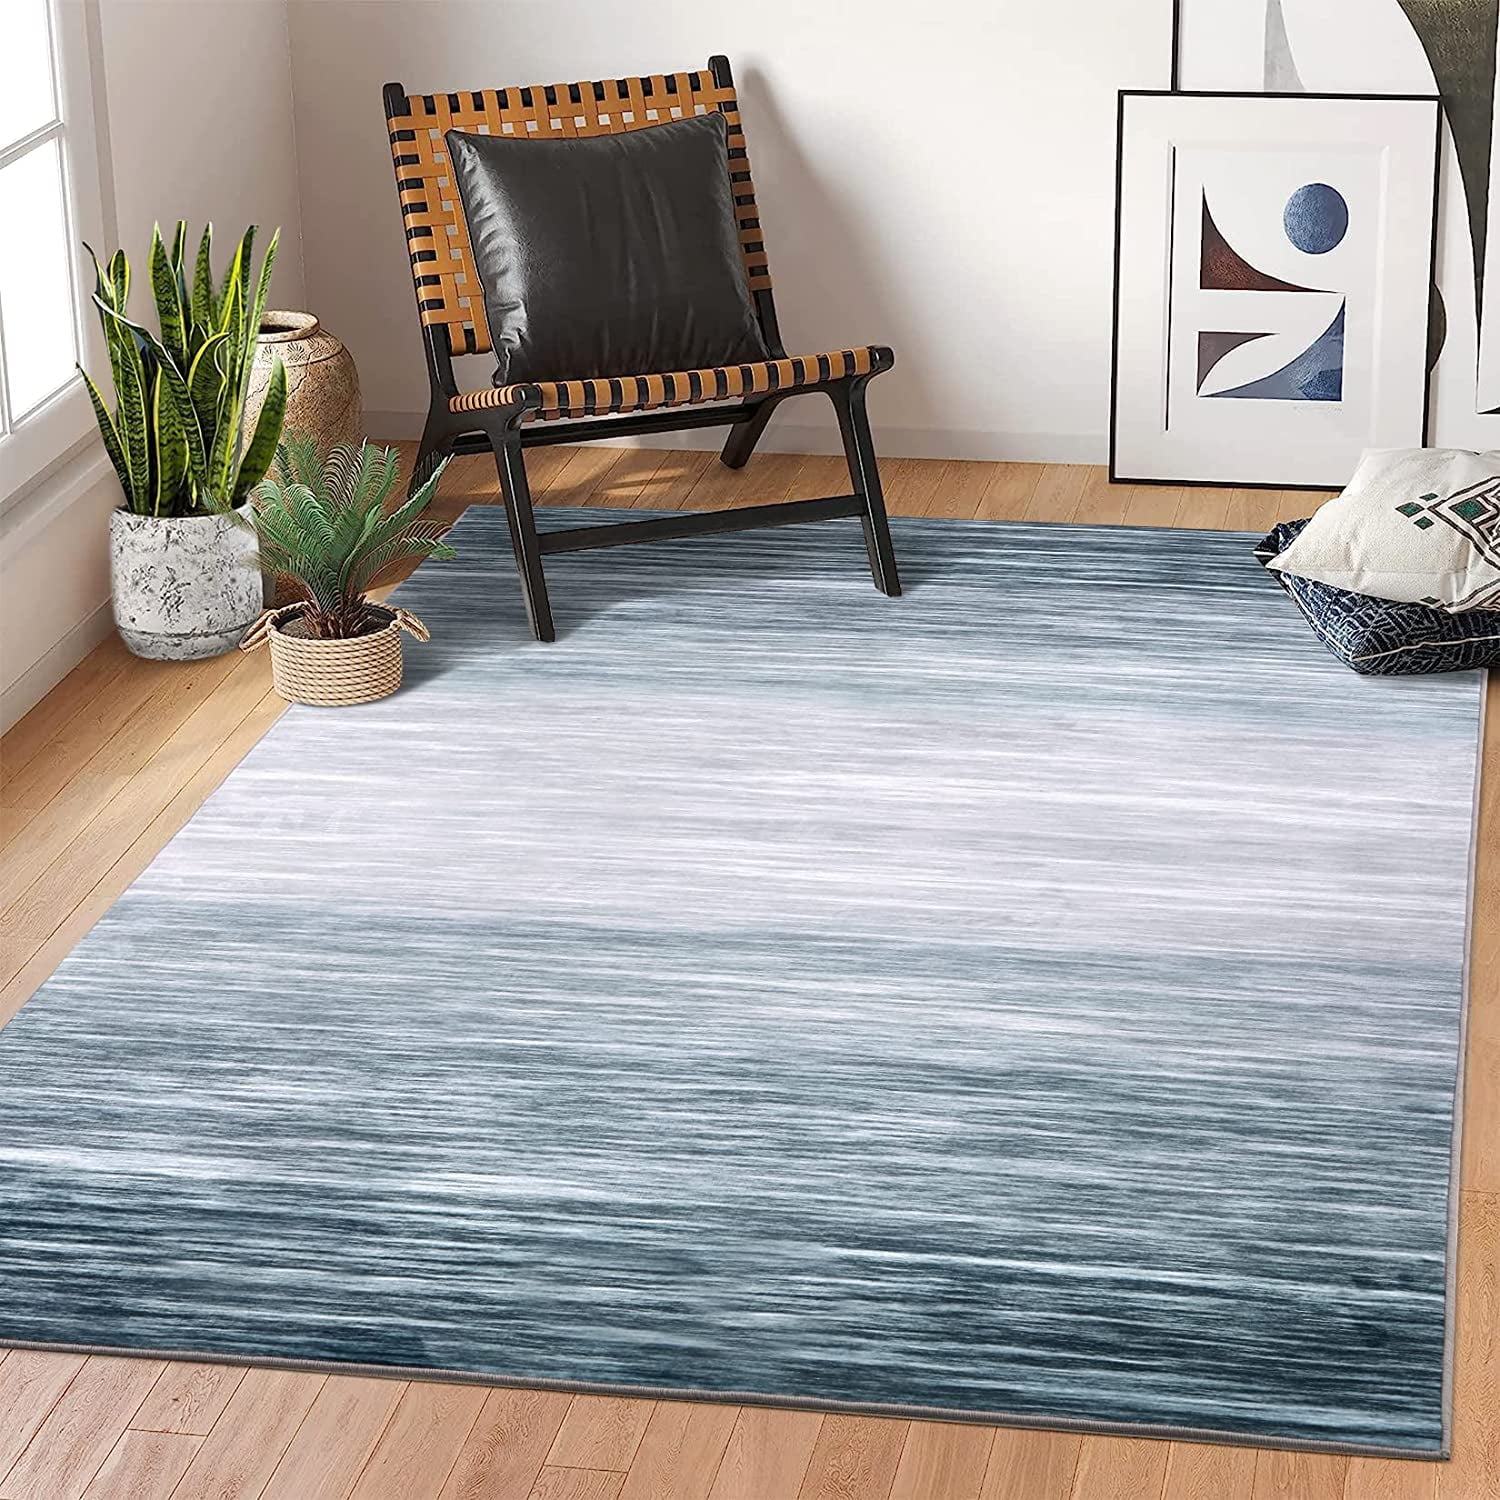 Contemporary Abstract Entryway Runner Rugs, Modern Runner Rugs Next to –